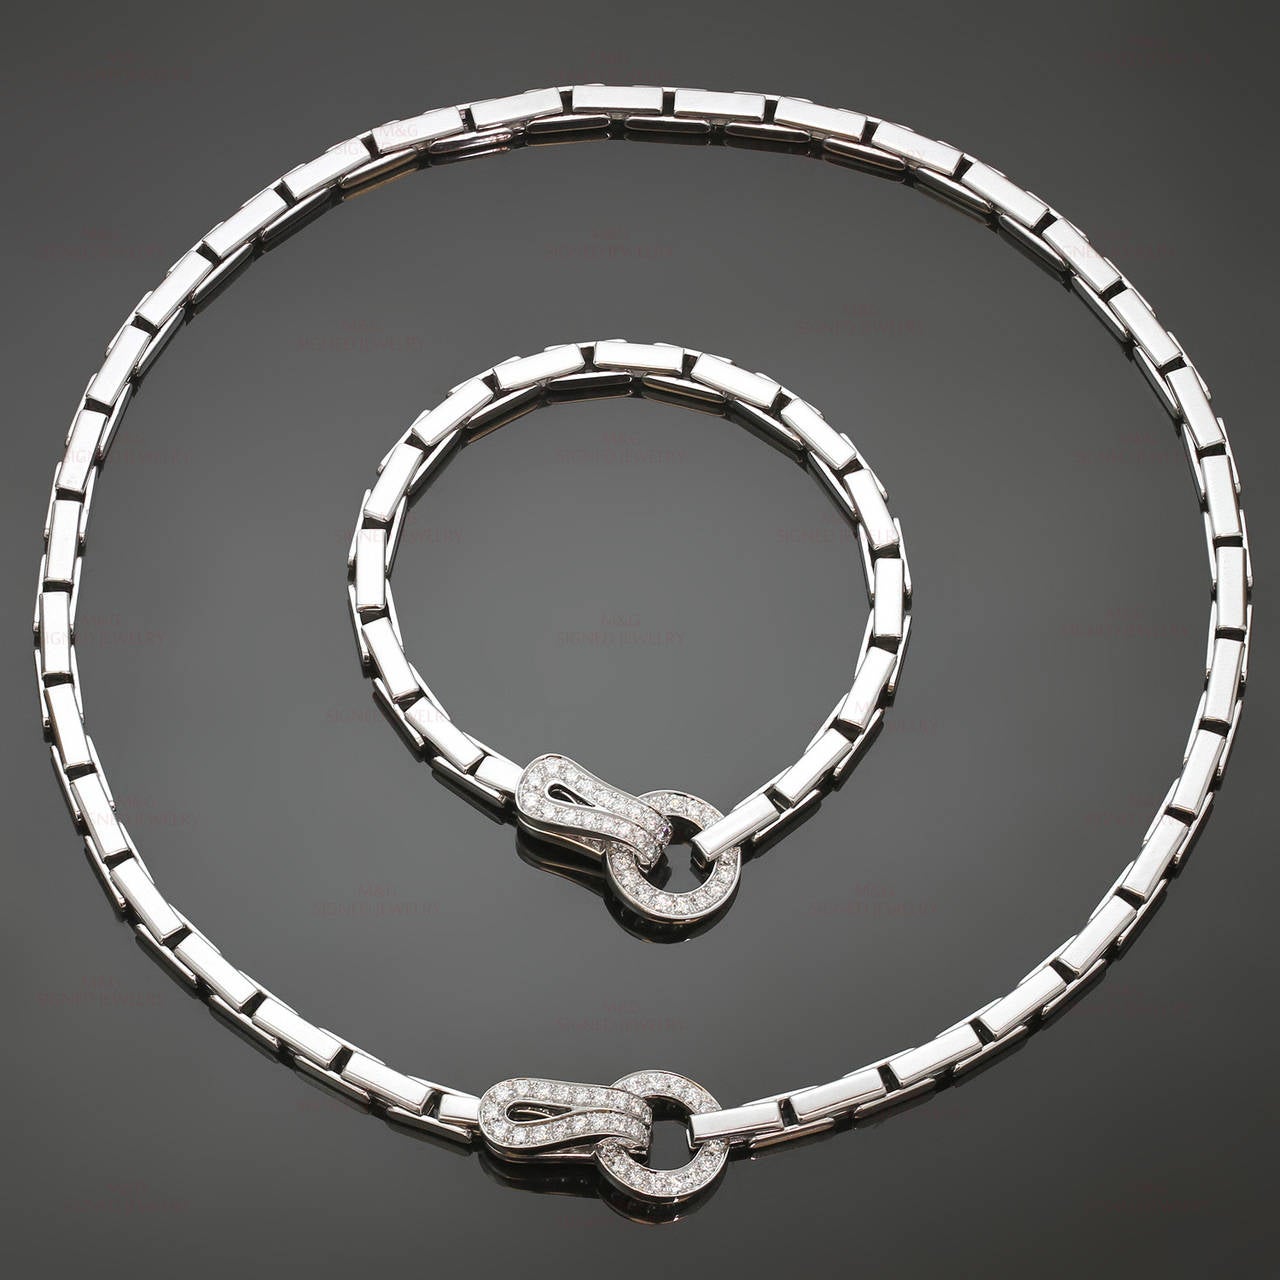 This modern Cartier necklace and bracelet set from the classic Agrafe collection is made in 18k white gold and set with brilliant-cut round D-F VVS1-VVS2 diamonds - an estimated 1.40 carats in the necklace and 1.30 carats in the bracelet. Simply